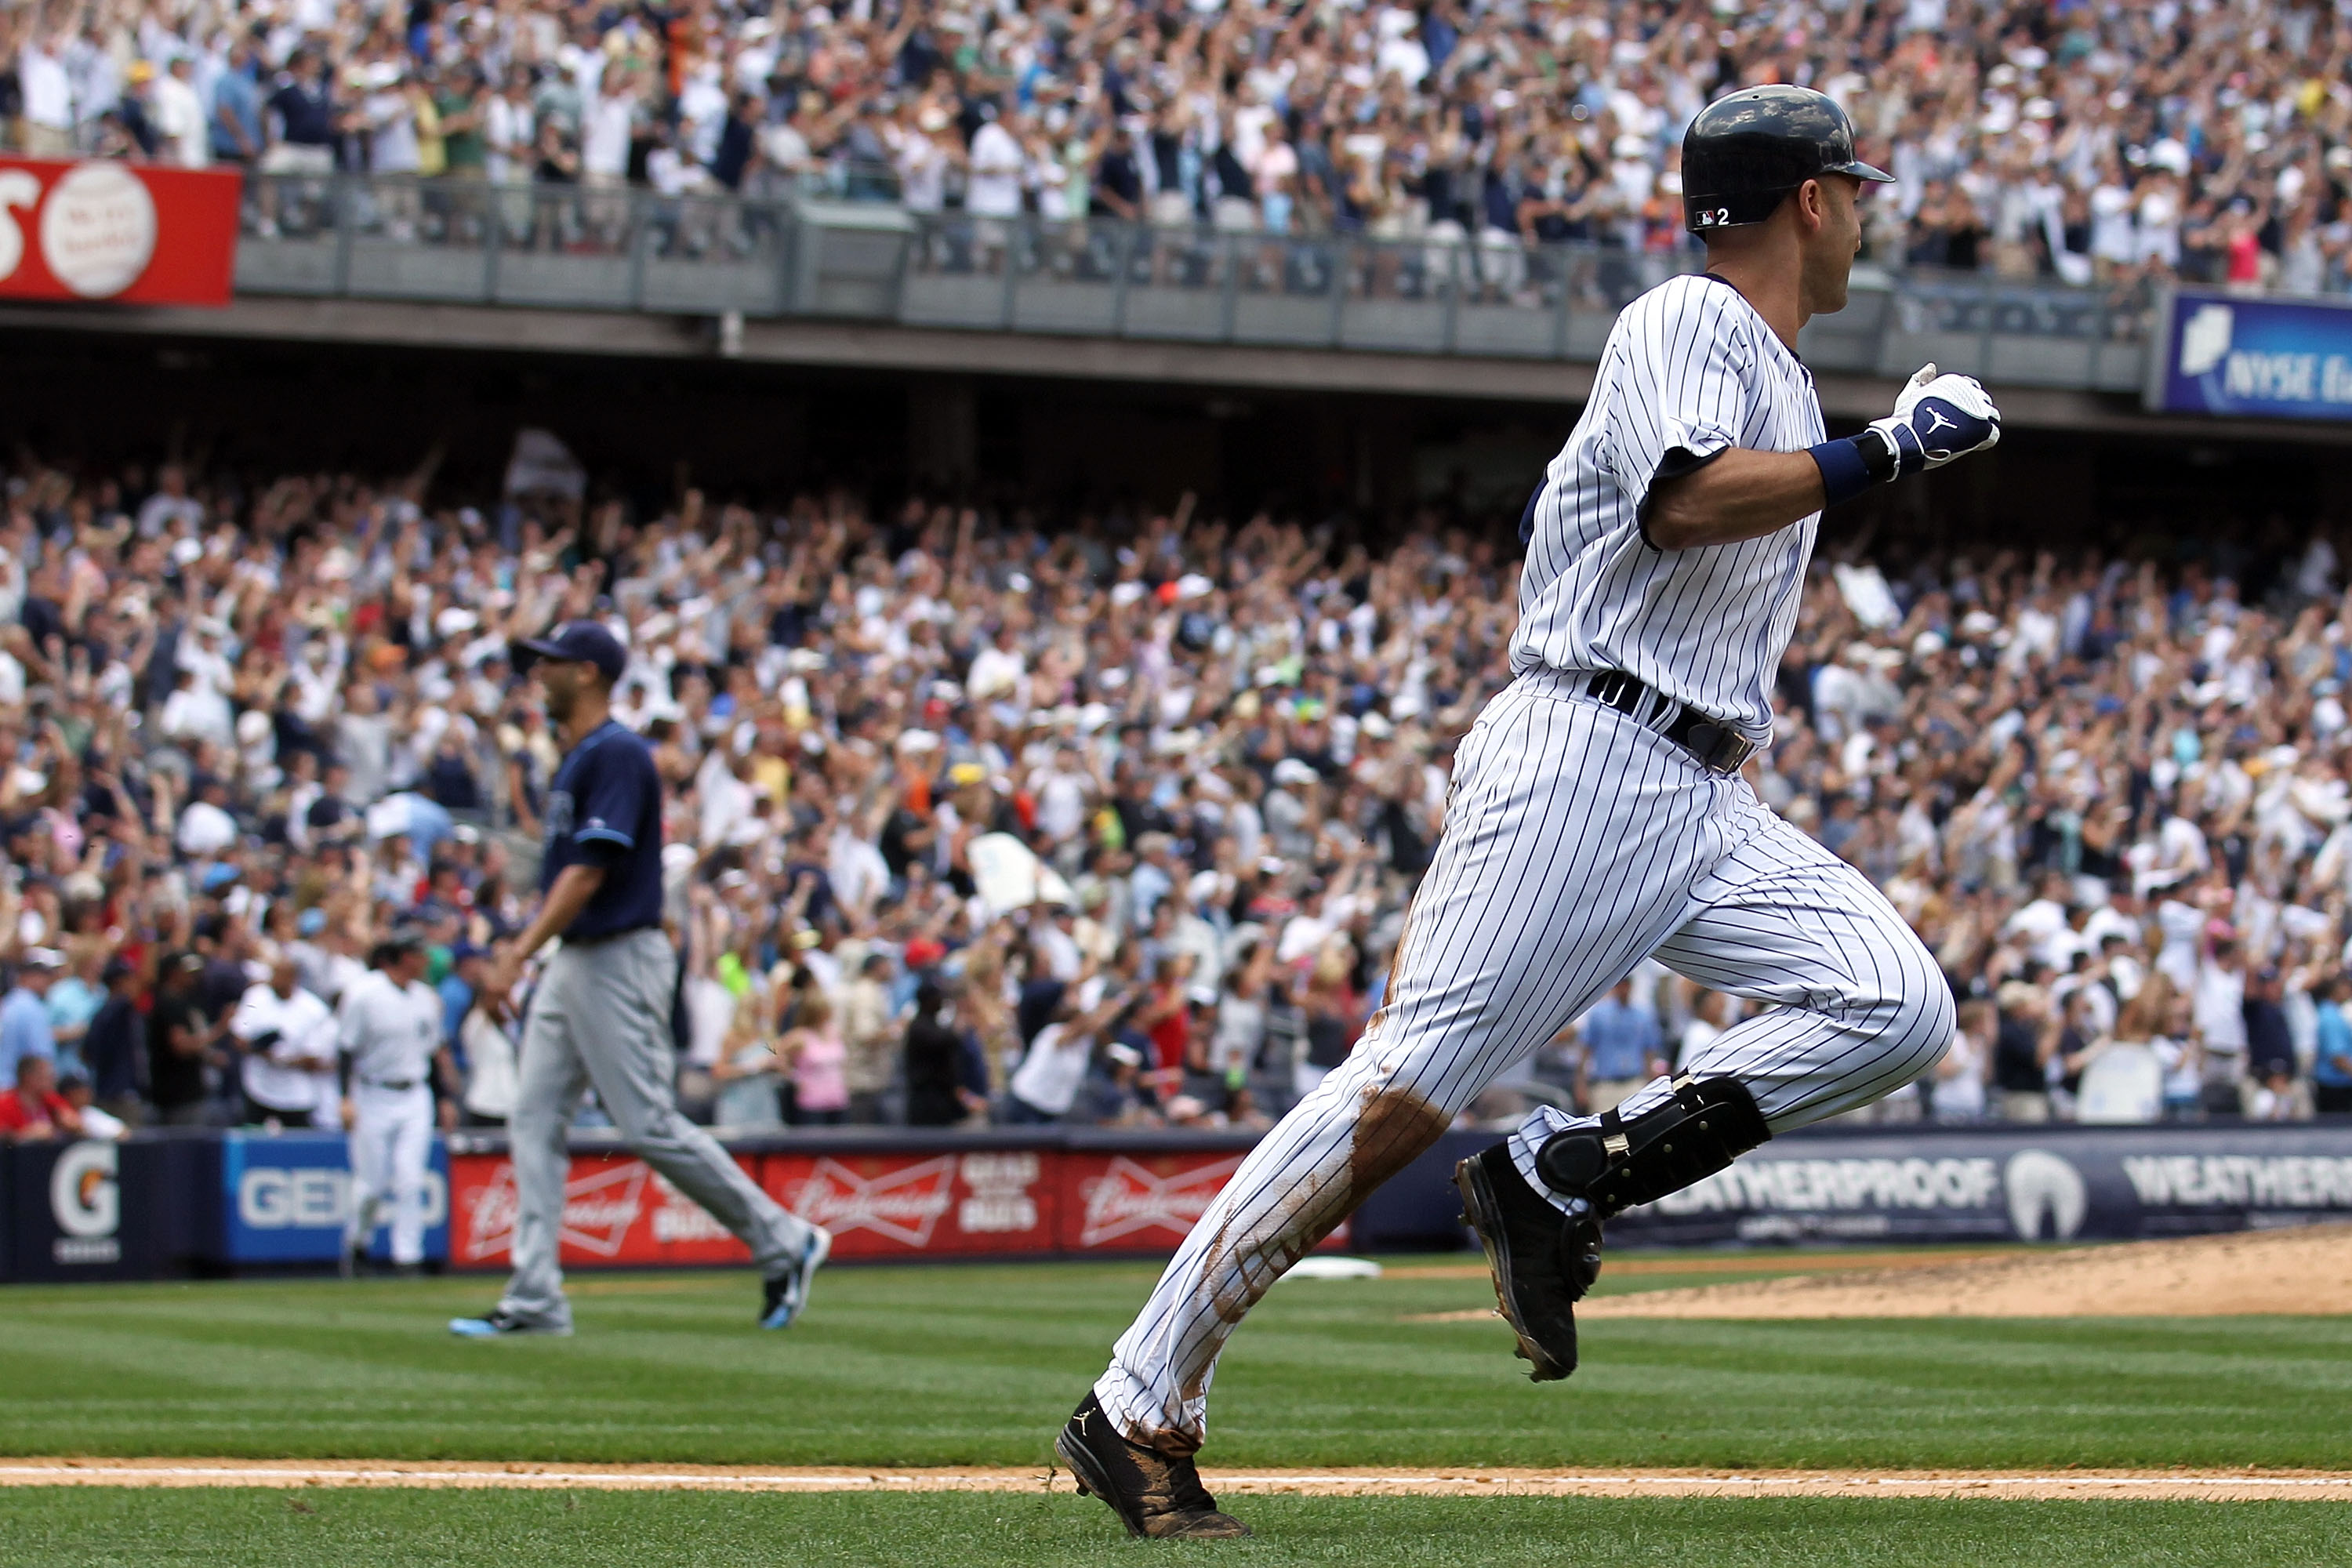 Derek Jeter rounds the bases after hitting a solo home run in the third inning off David Price for career hit No. 3,000.  (Photo by Nick Laham/Getty Images)